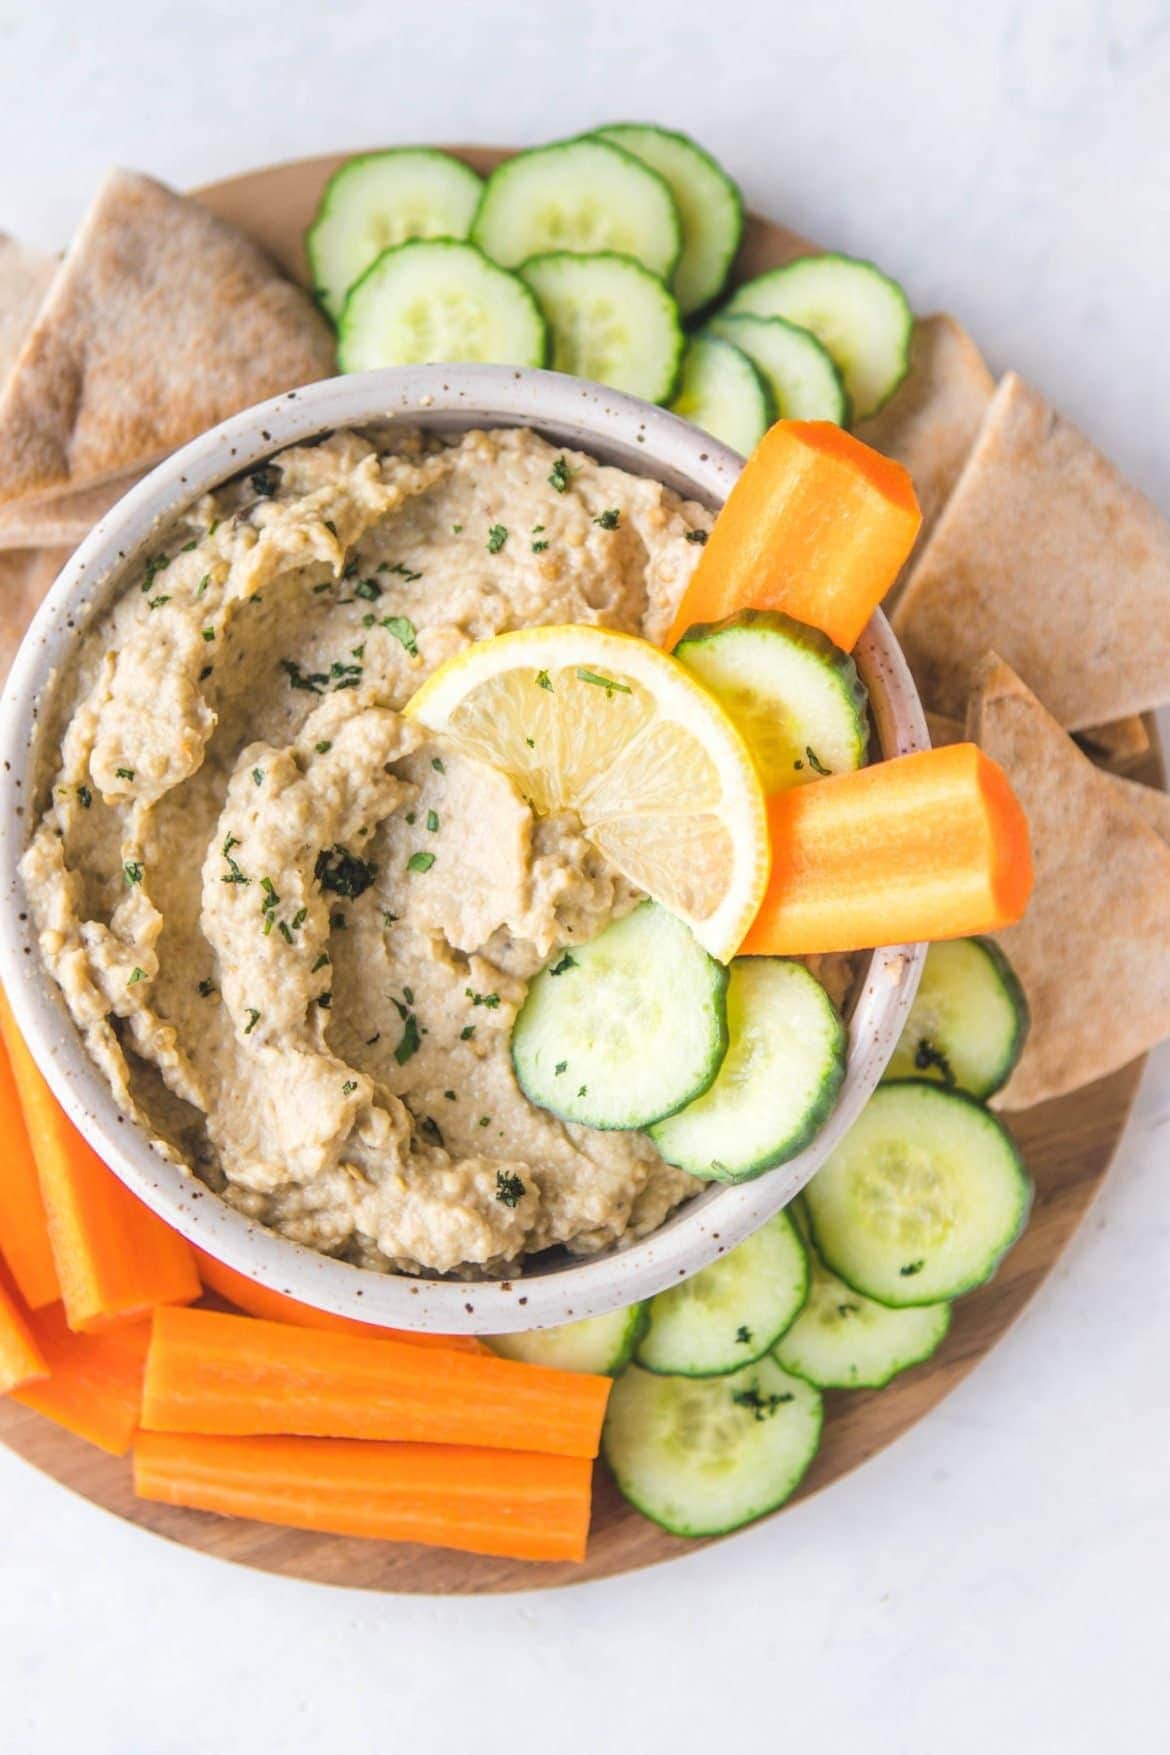 Sliced cucumber, carrots and pita bread served with baba ganoush in a bowl, 